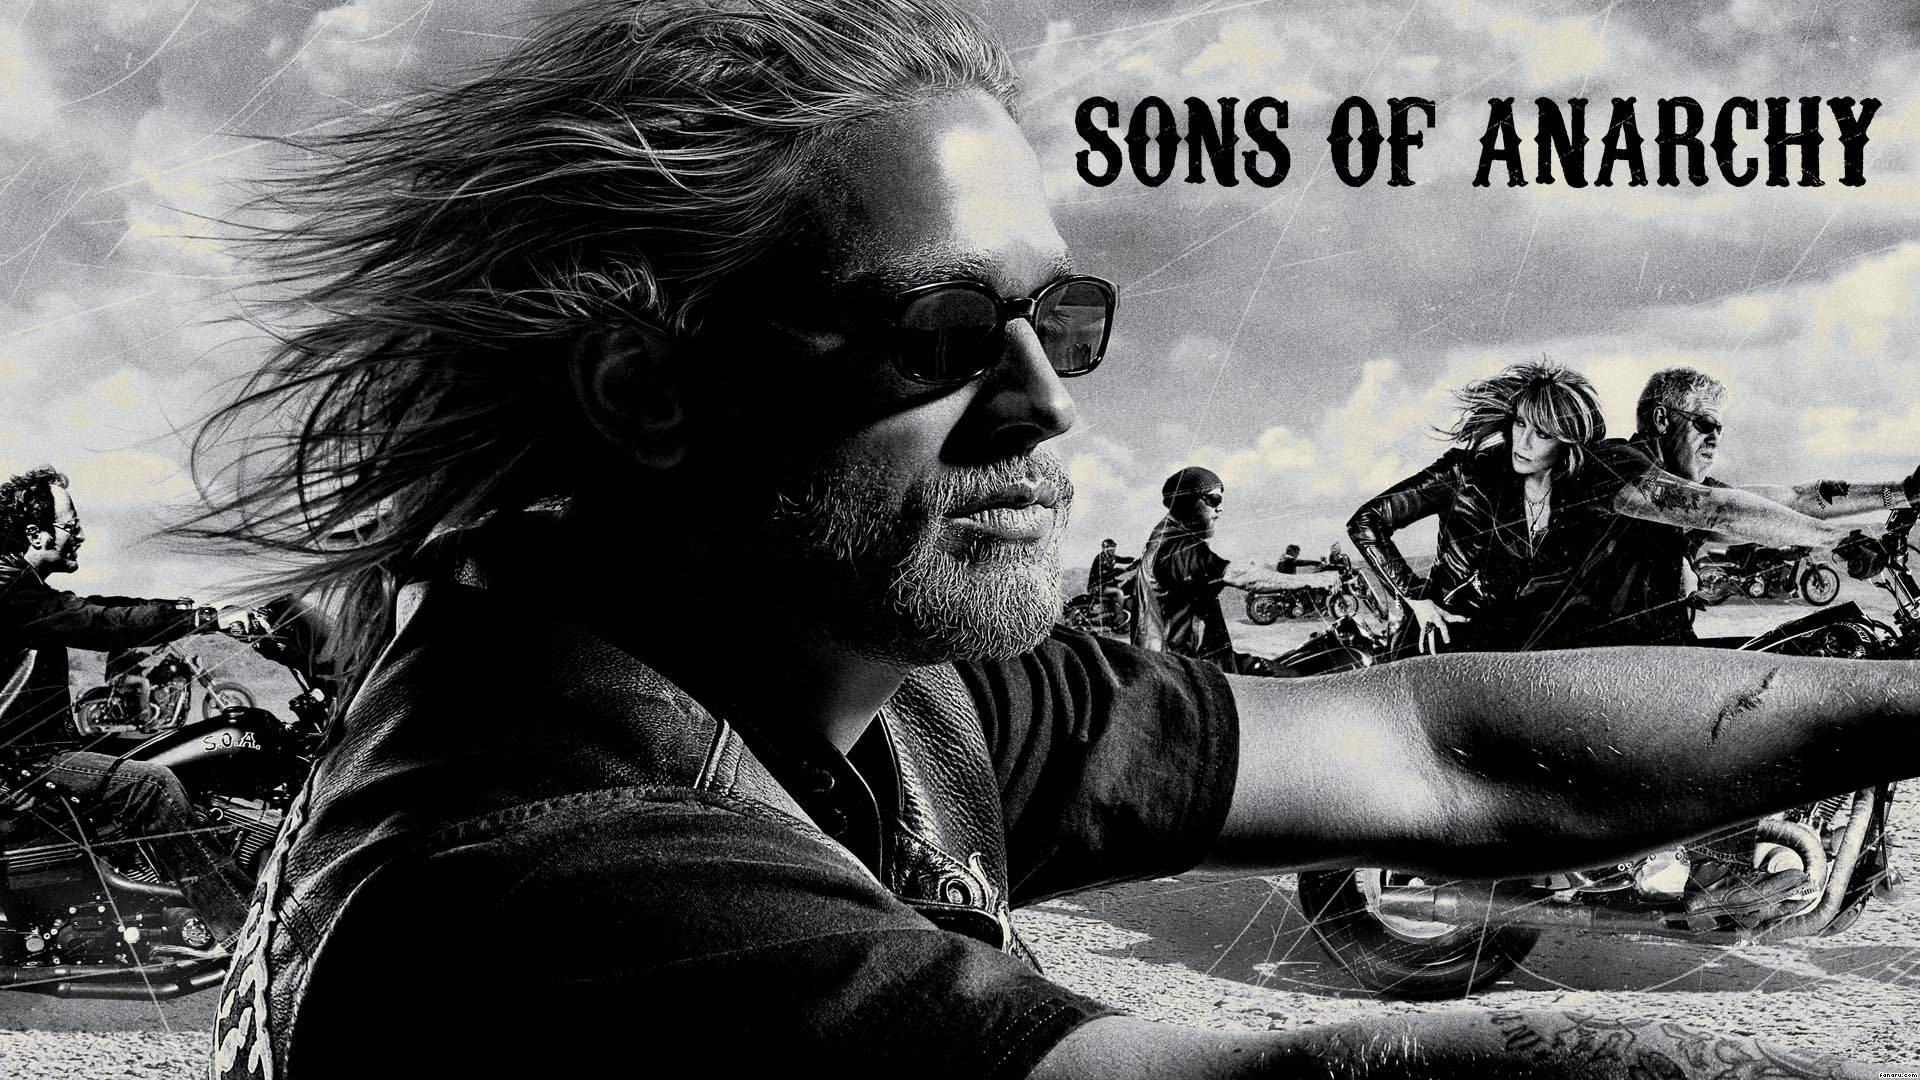 Best Image Sons Of Anarchy Wallpaper Amazing